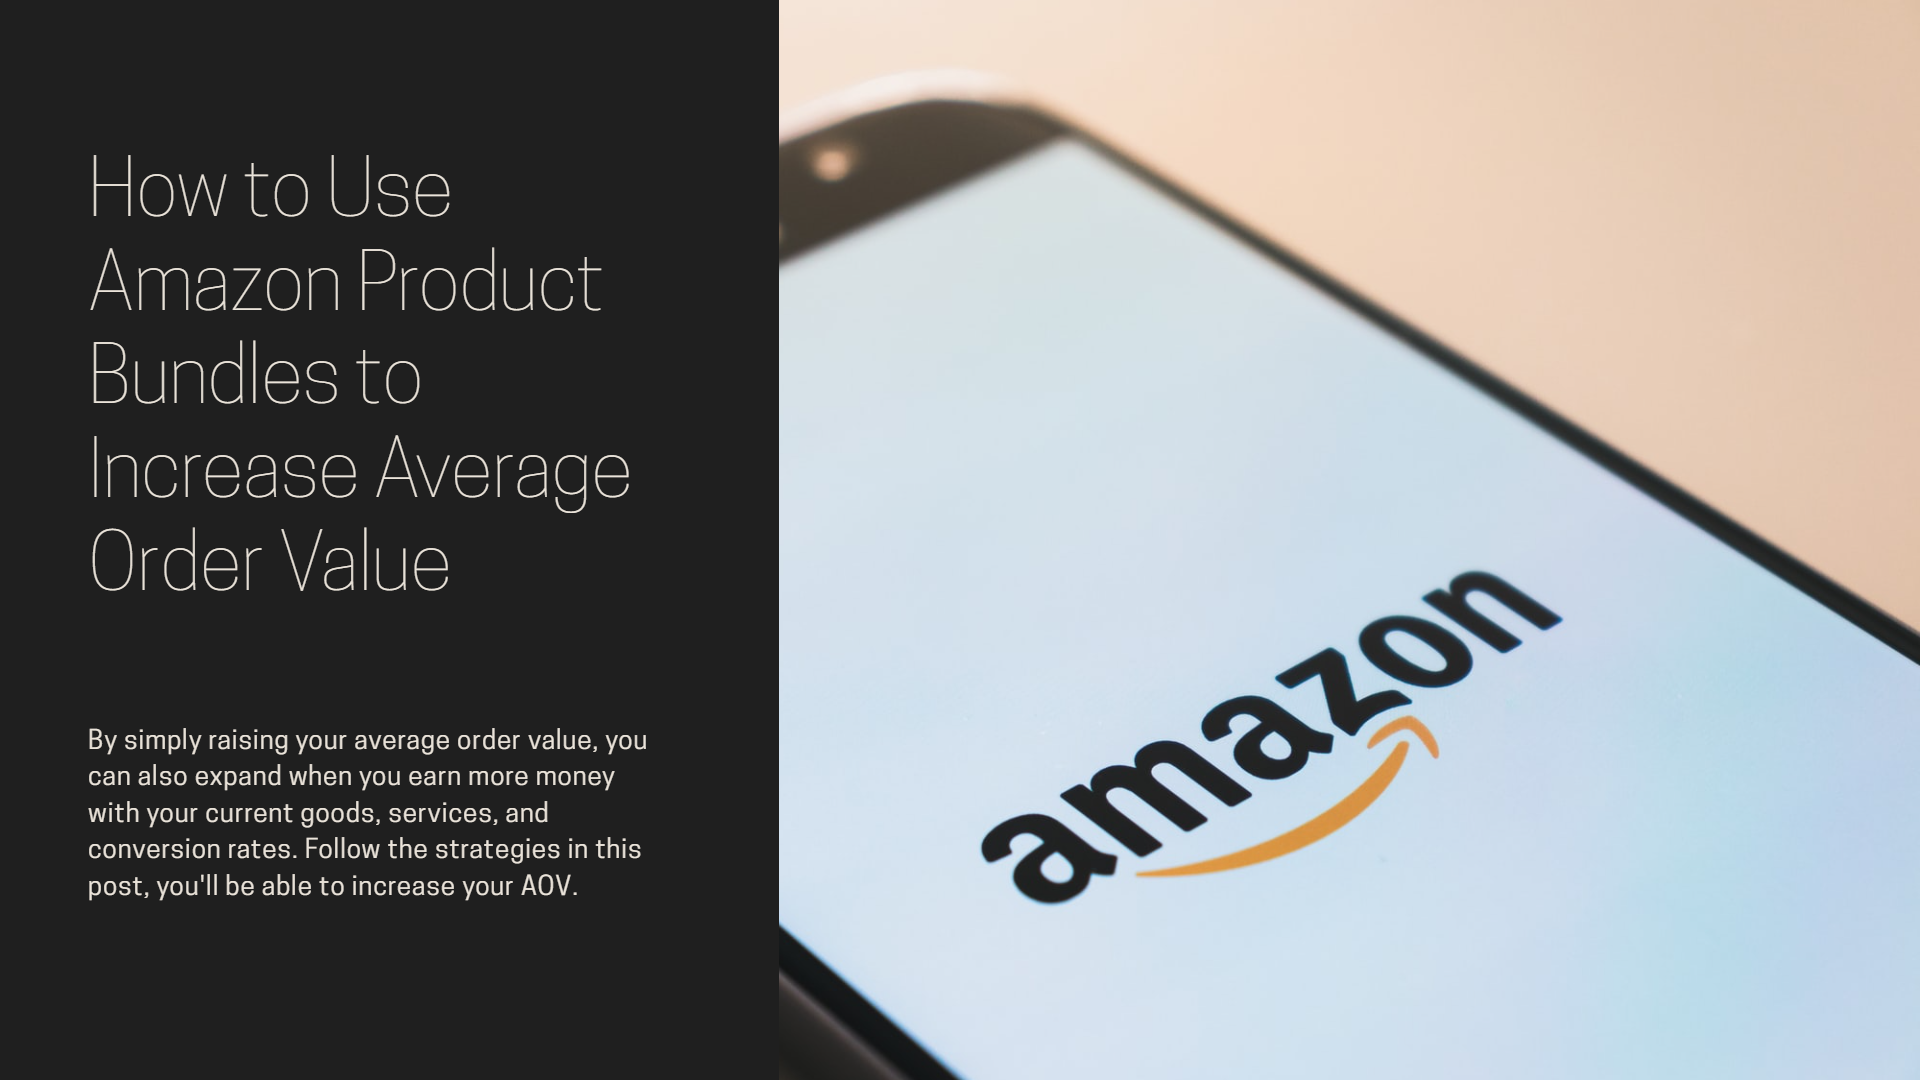 How to Use Amazon Product Bundles to Increase Average Order Value